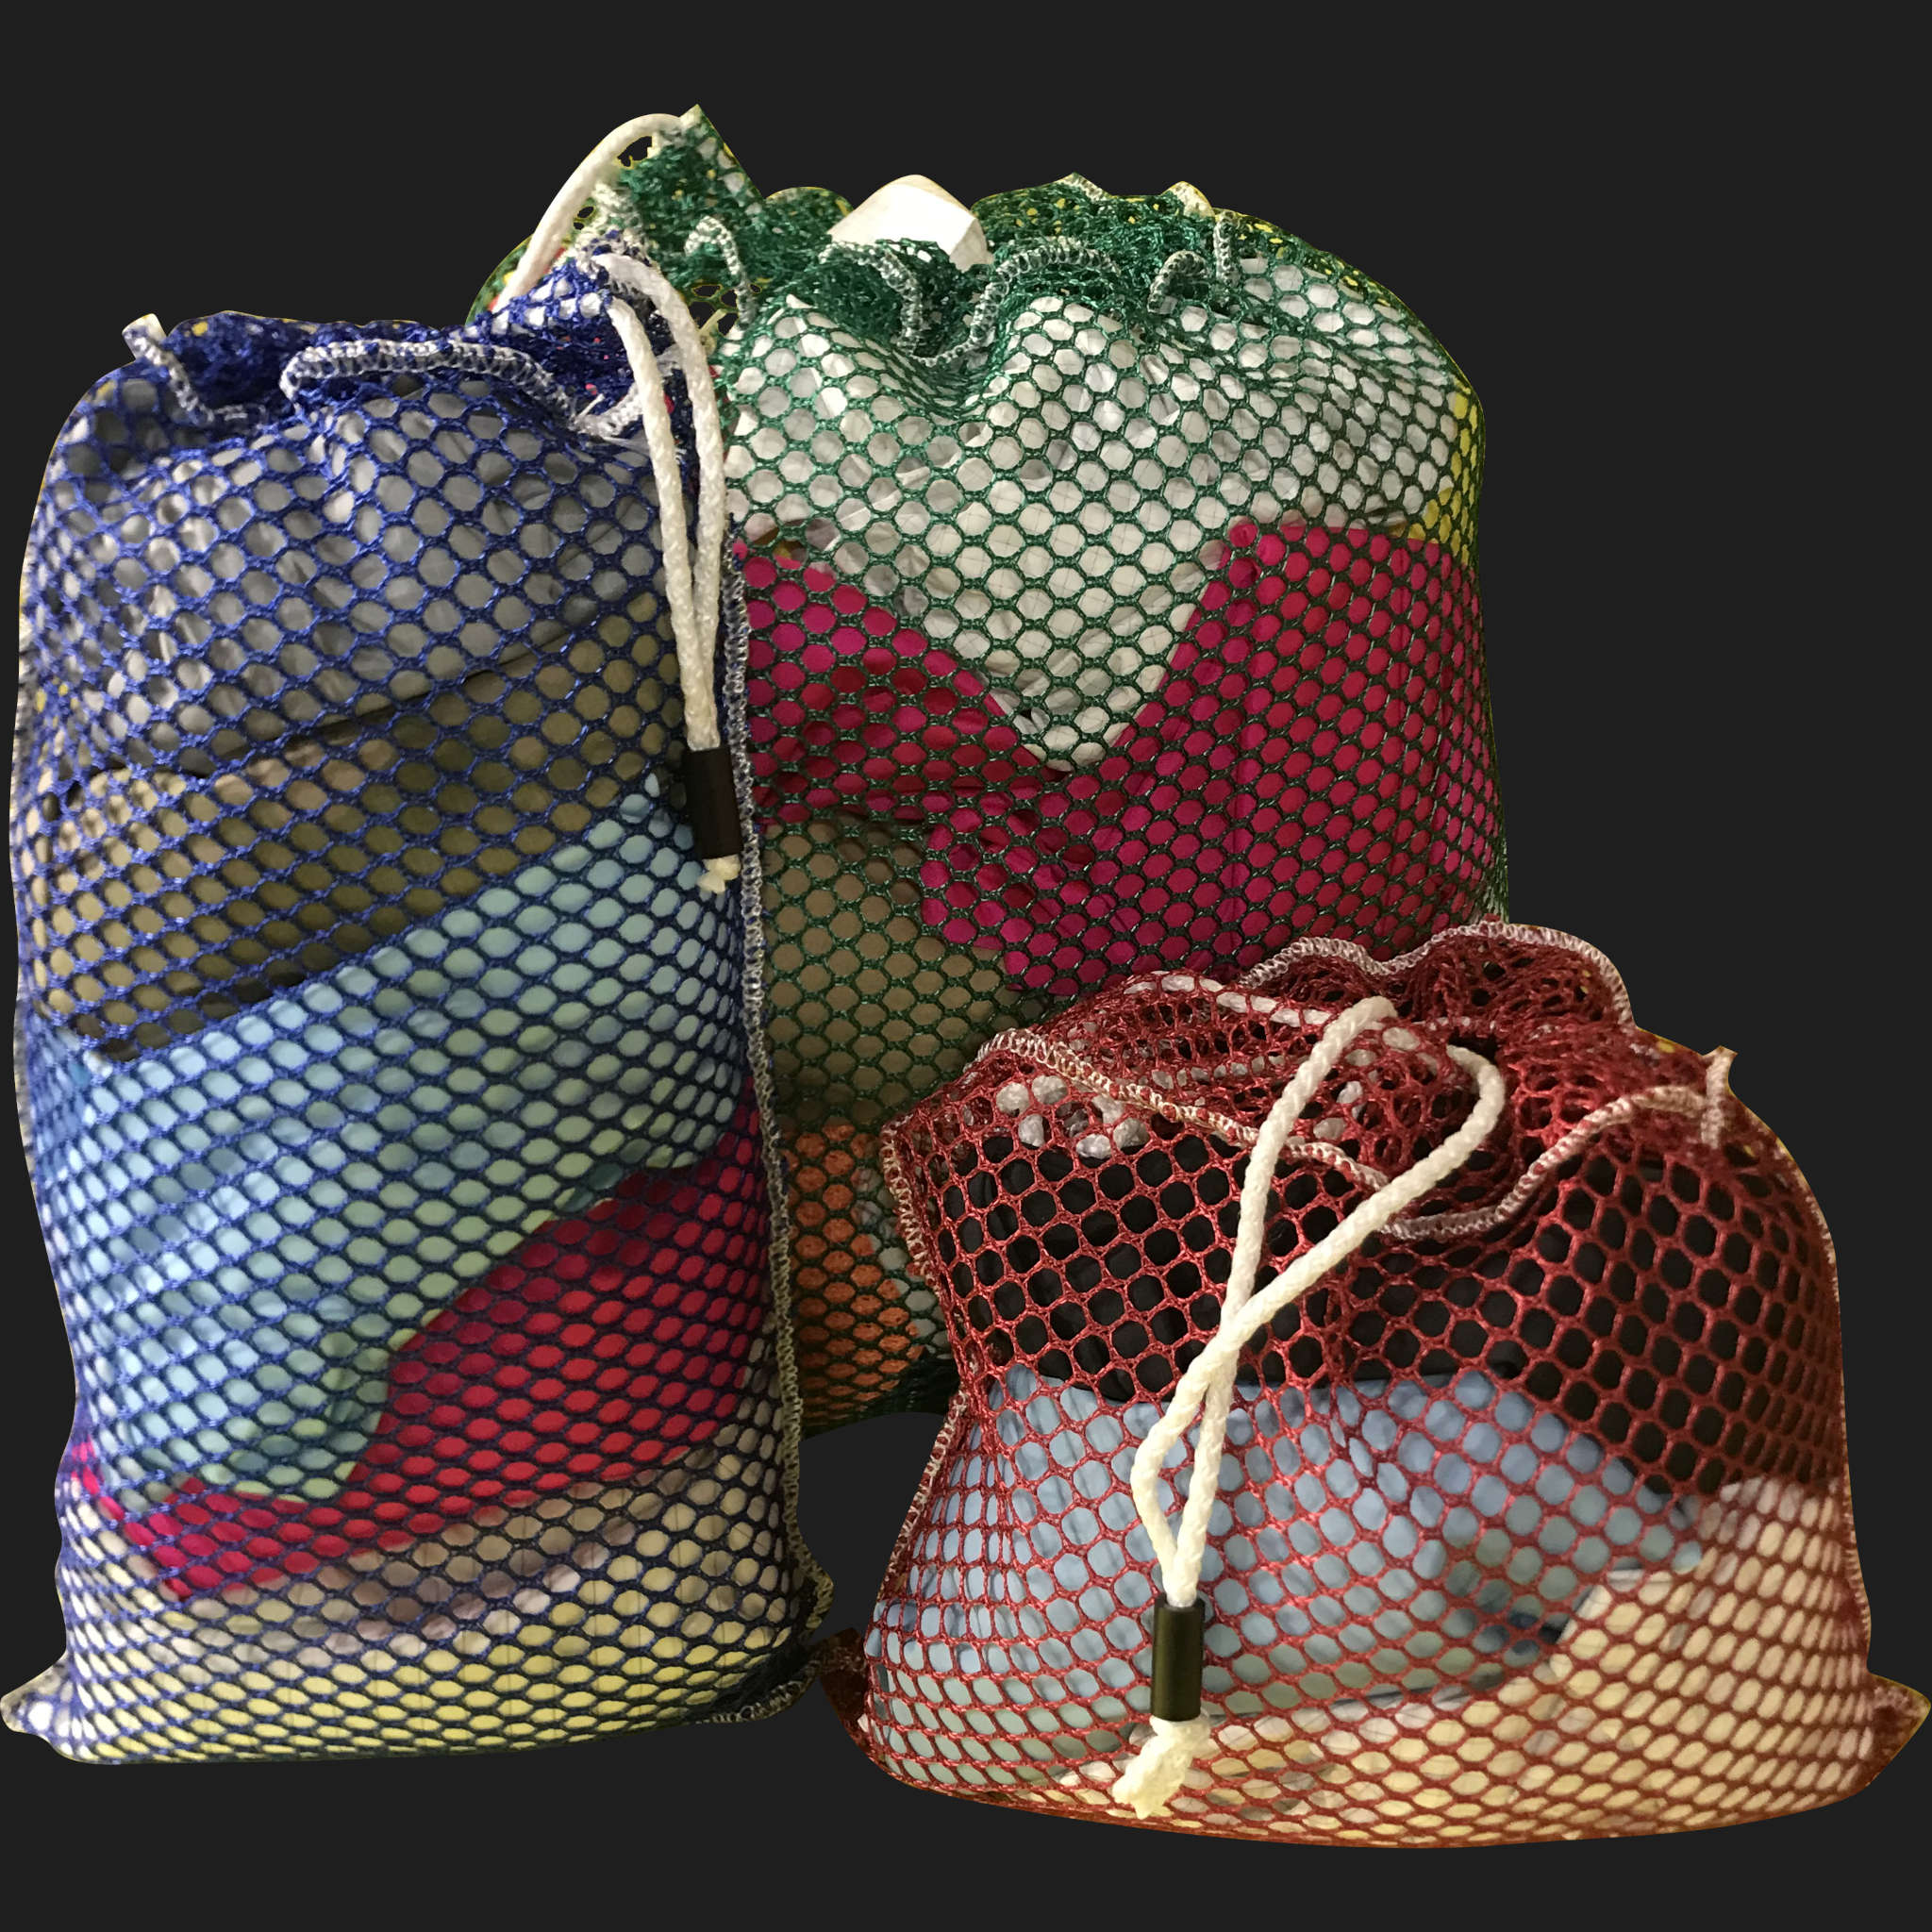 28" x 32" Customized Mesh-Net-Laundry Bags Heavy Duty with Cord and barrellock closure